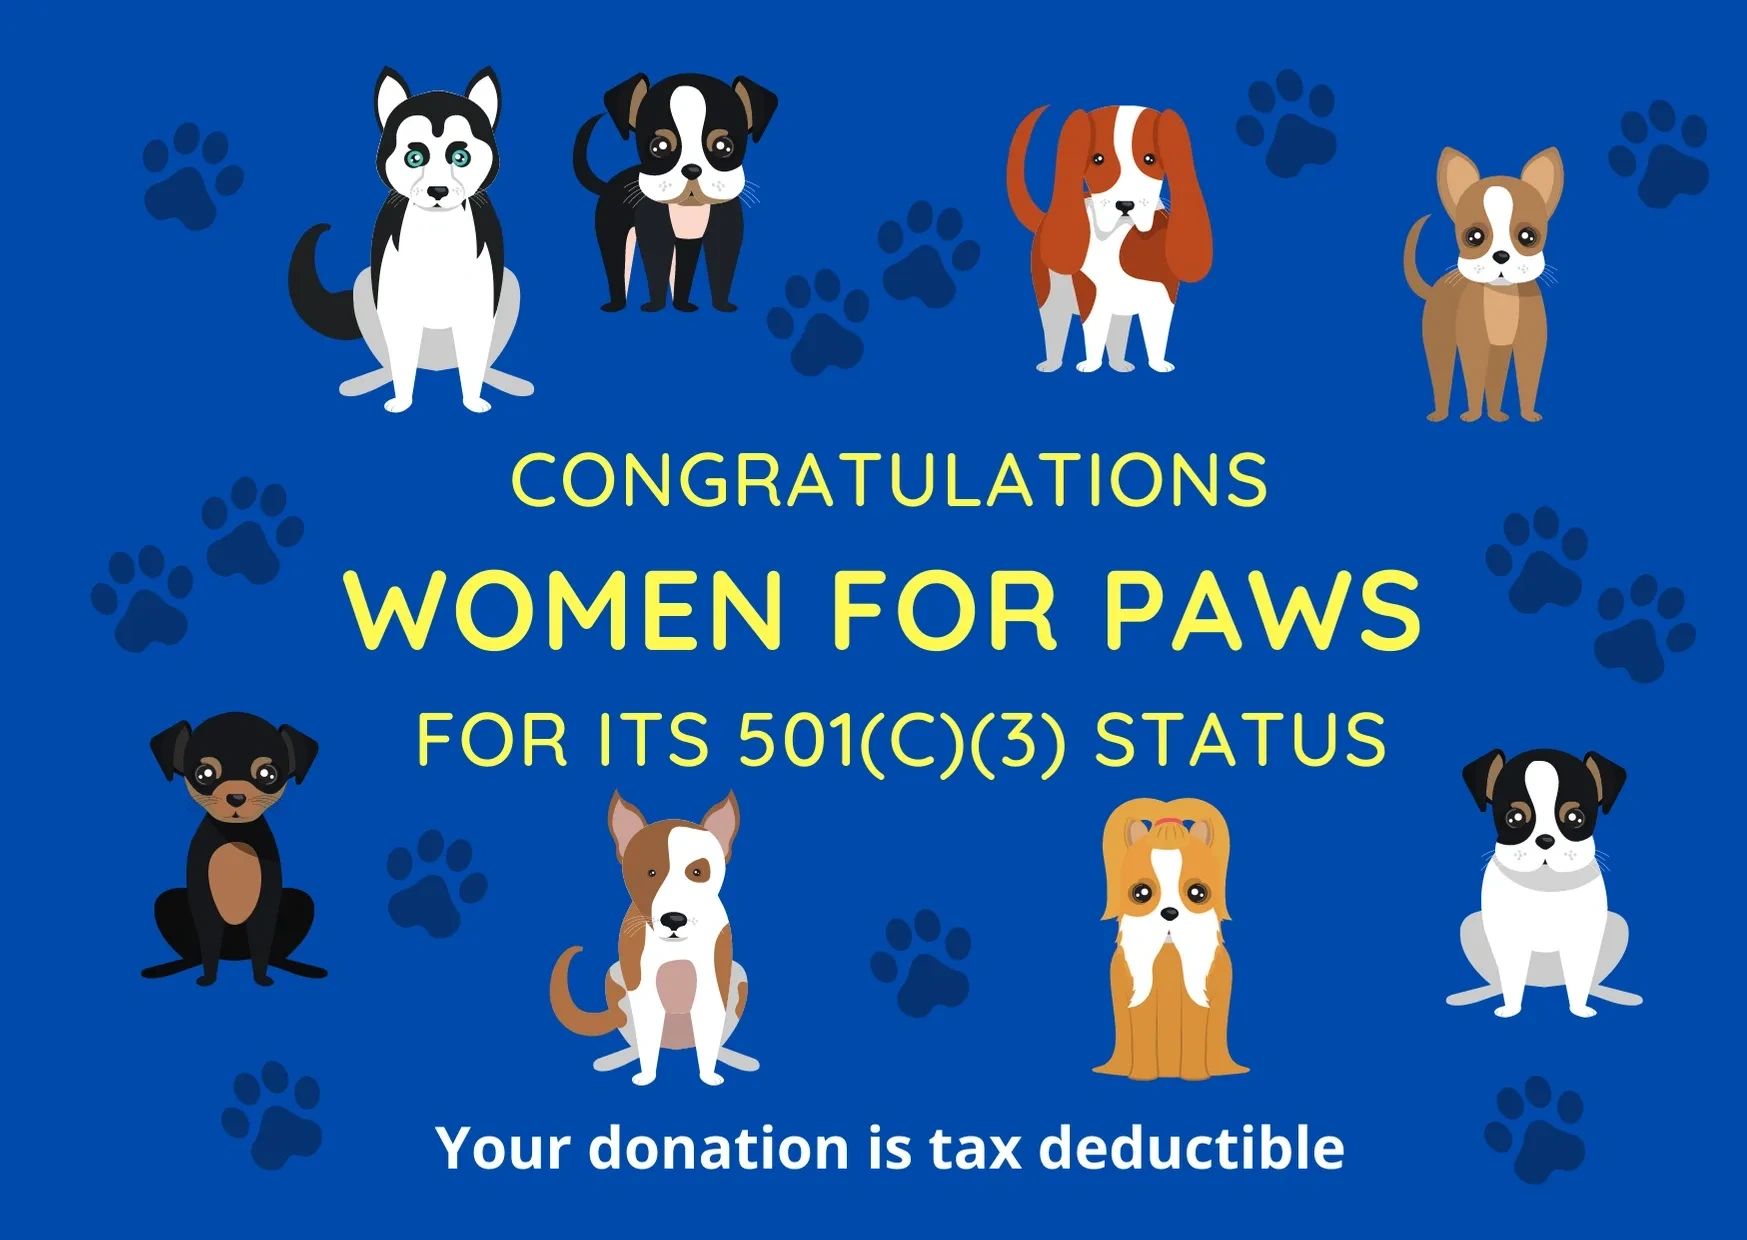 Women for Paws is a 501(c)(3) organization where your donations are tax deductible. 
